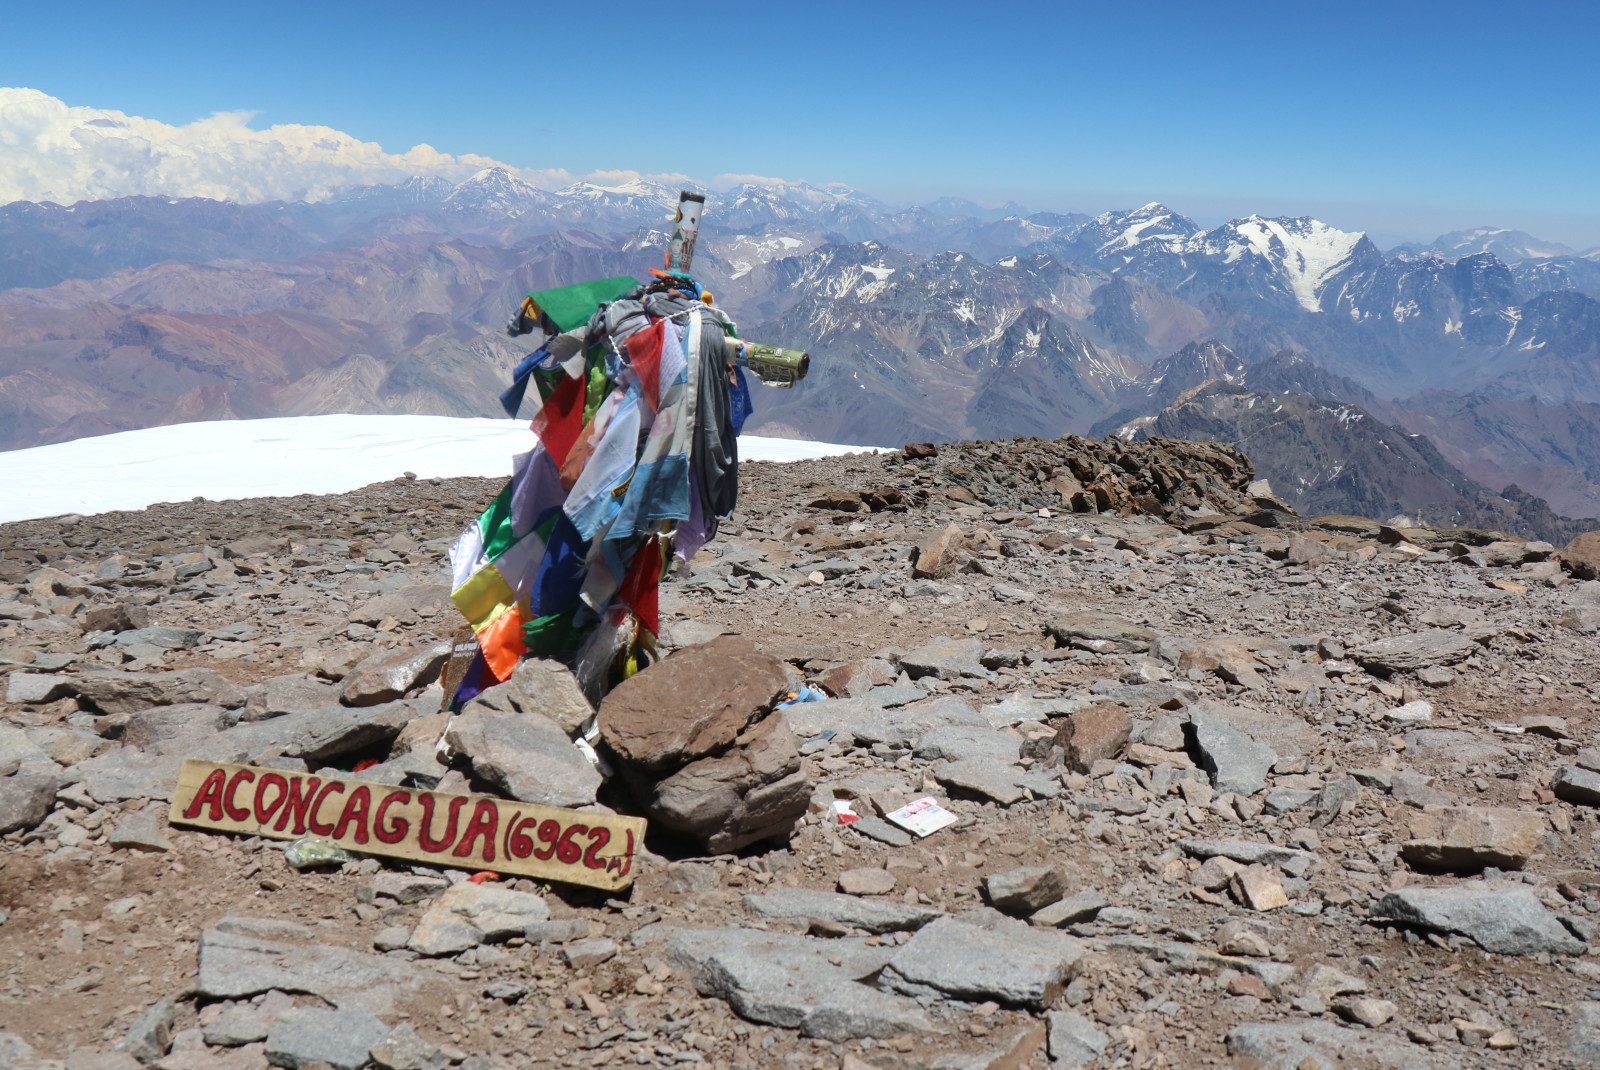 At the top of Aconcagua mountain in Mendoza Argentina overlooking a white snowcapped mountain range.